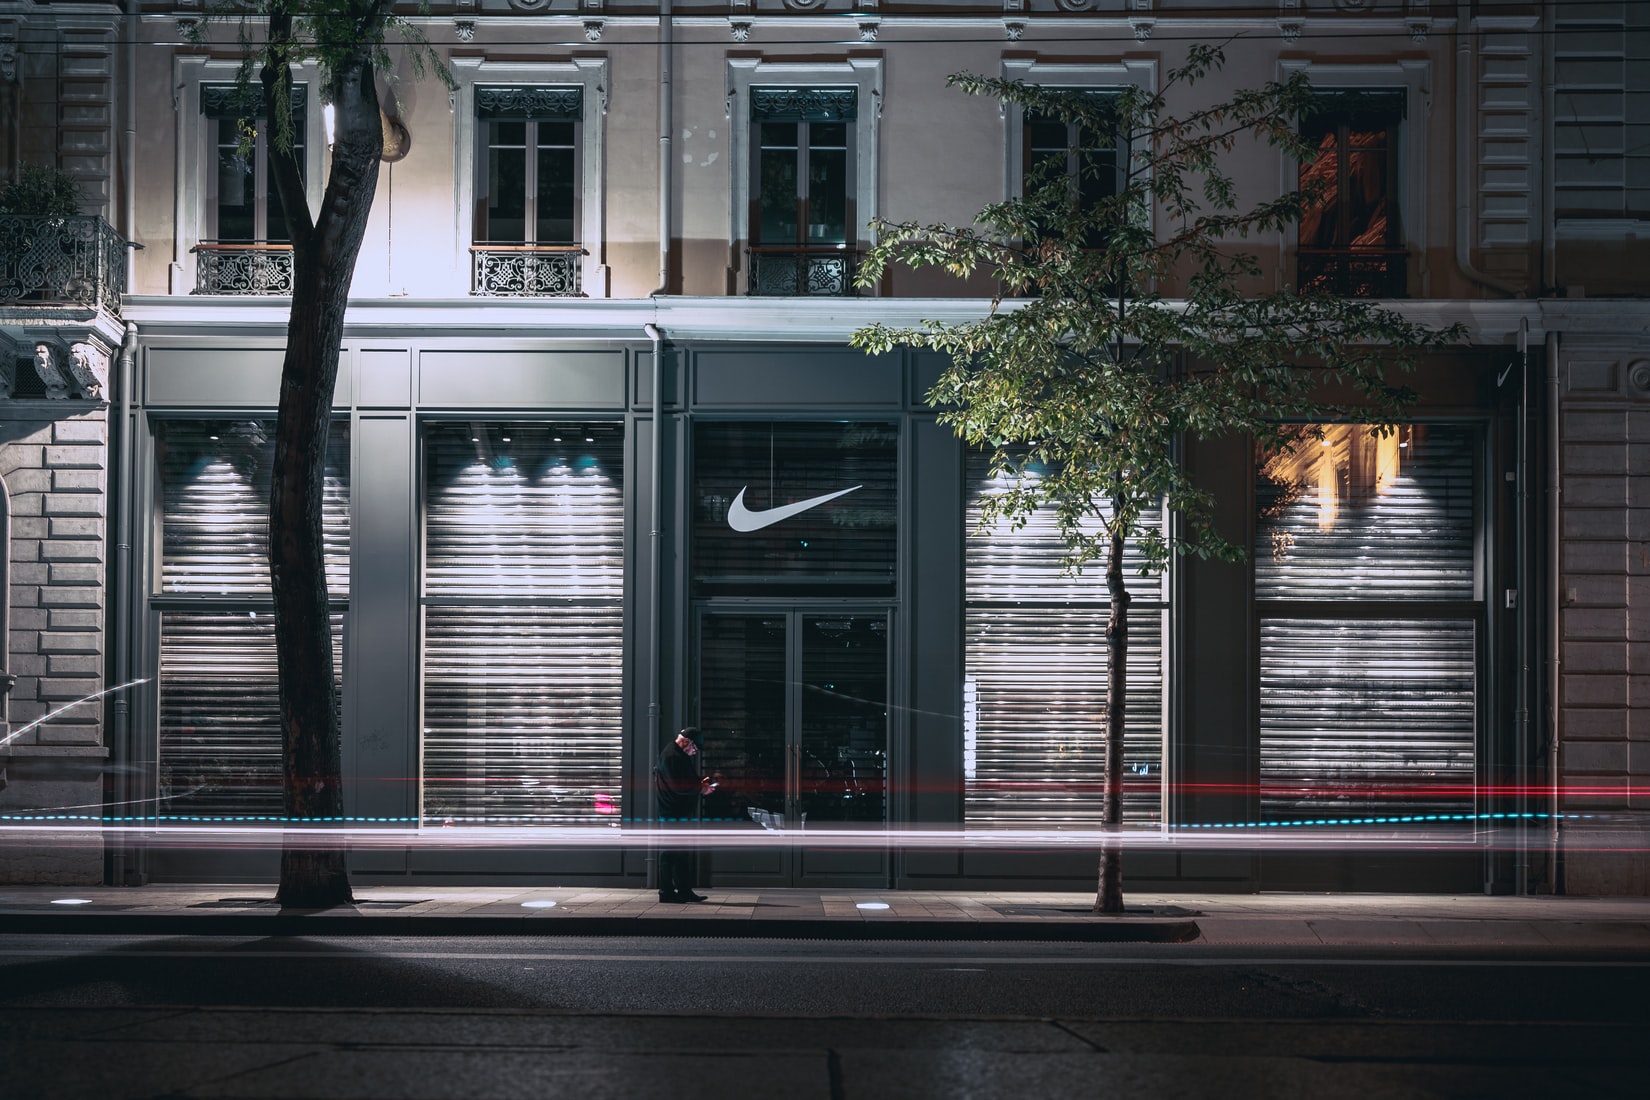 Nike VP Resigns After Family Ties to Reseller Revealed